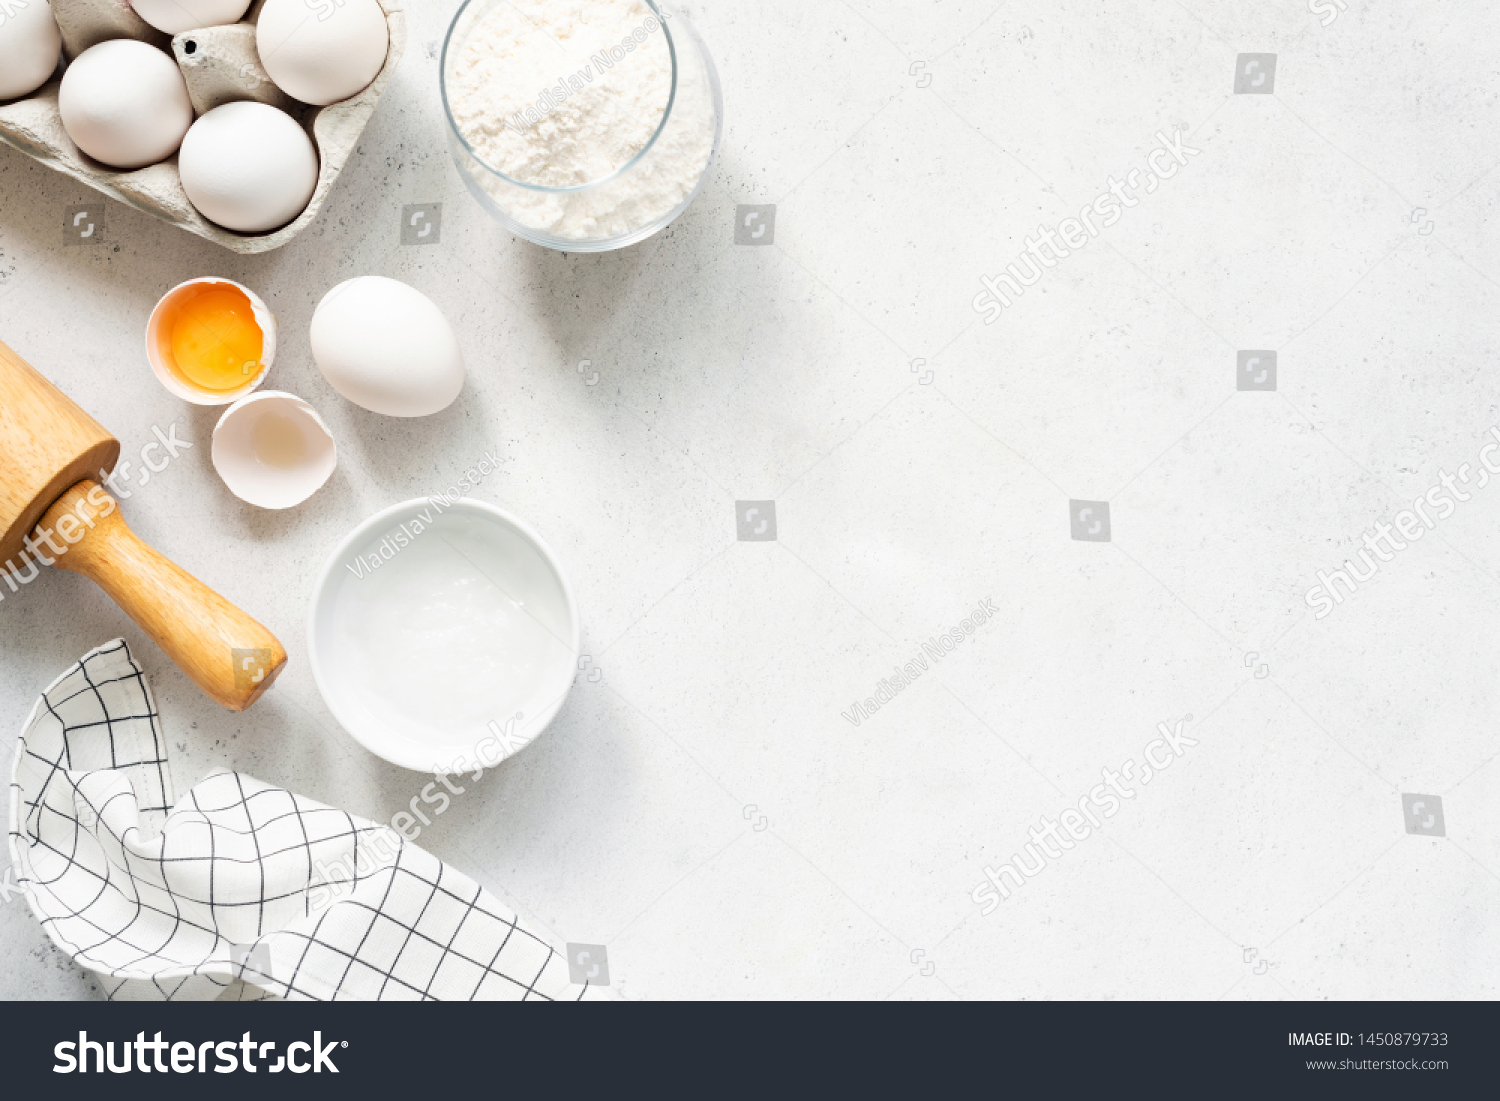 Baking Cooking Ingredients Flour Eggs Rolling Pin Butter And Kitchen Textile On Bright Grey Concrete Background. Top View Copy Space. Cookies Pie Or Cake Recipe Mockup #1450879733